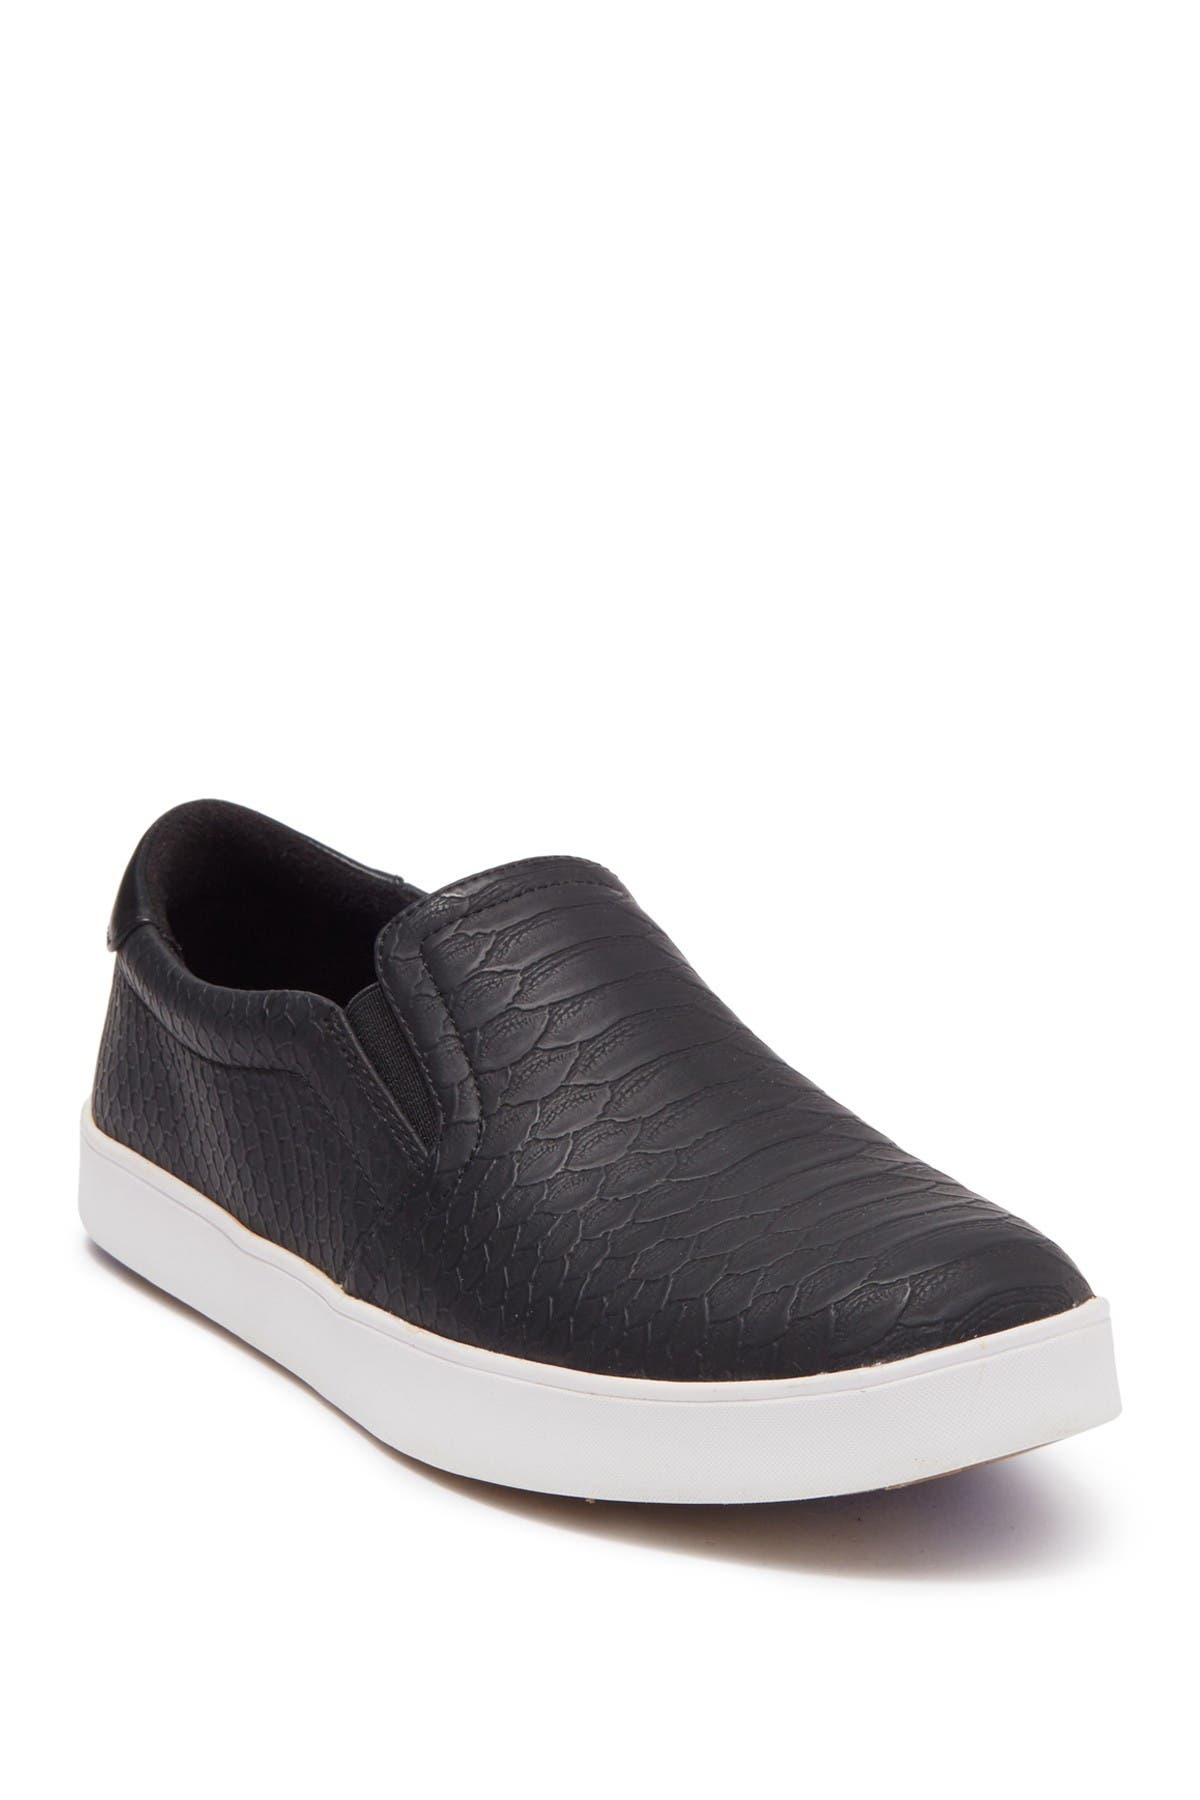 UPC 727679380232 product image for Dr. Scholl's Madison Slip-On Sneaker, Size 8 in Black Python at Nordstrom | upcitemdb.com